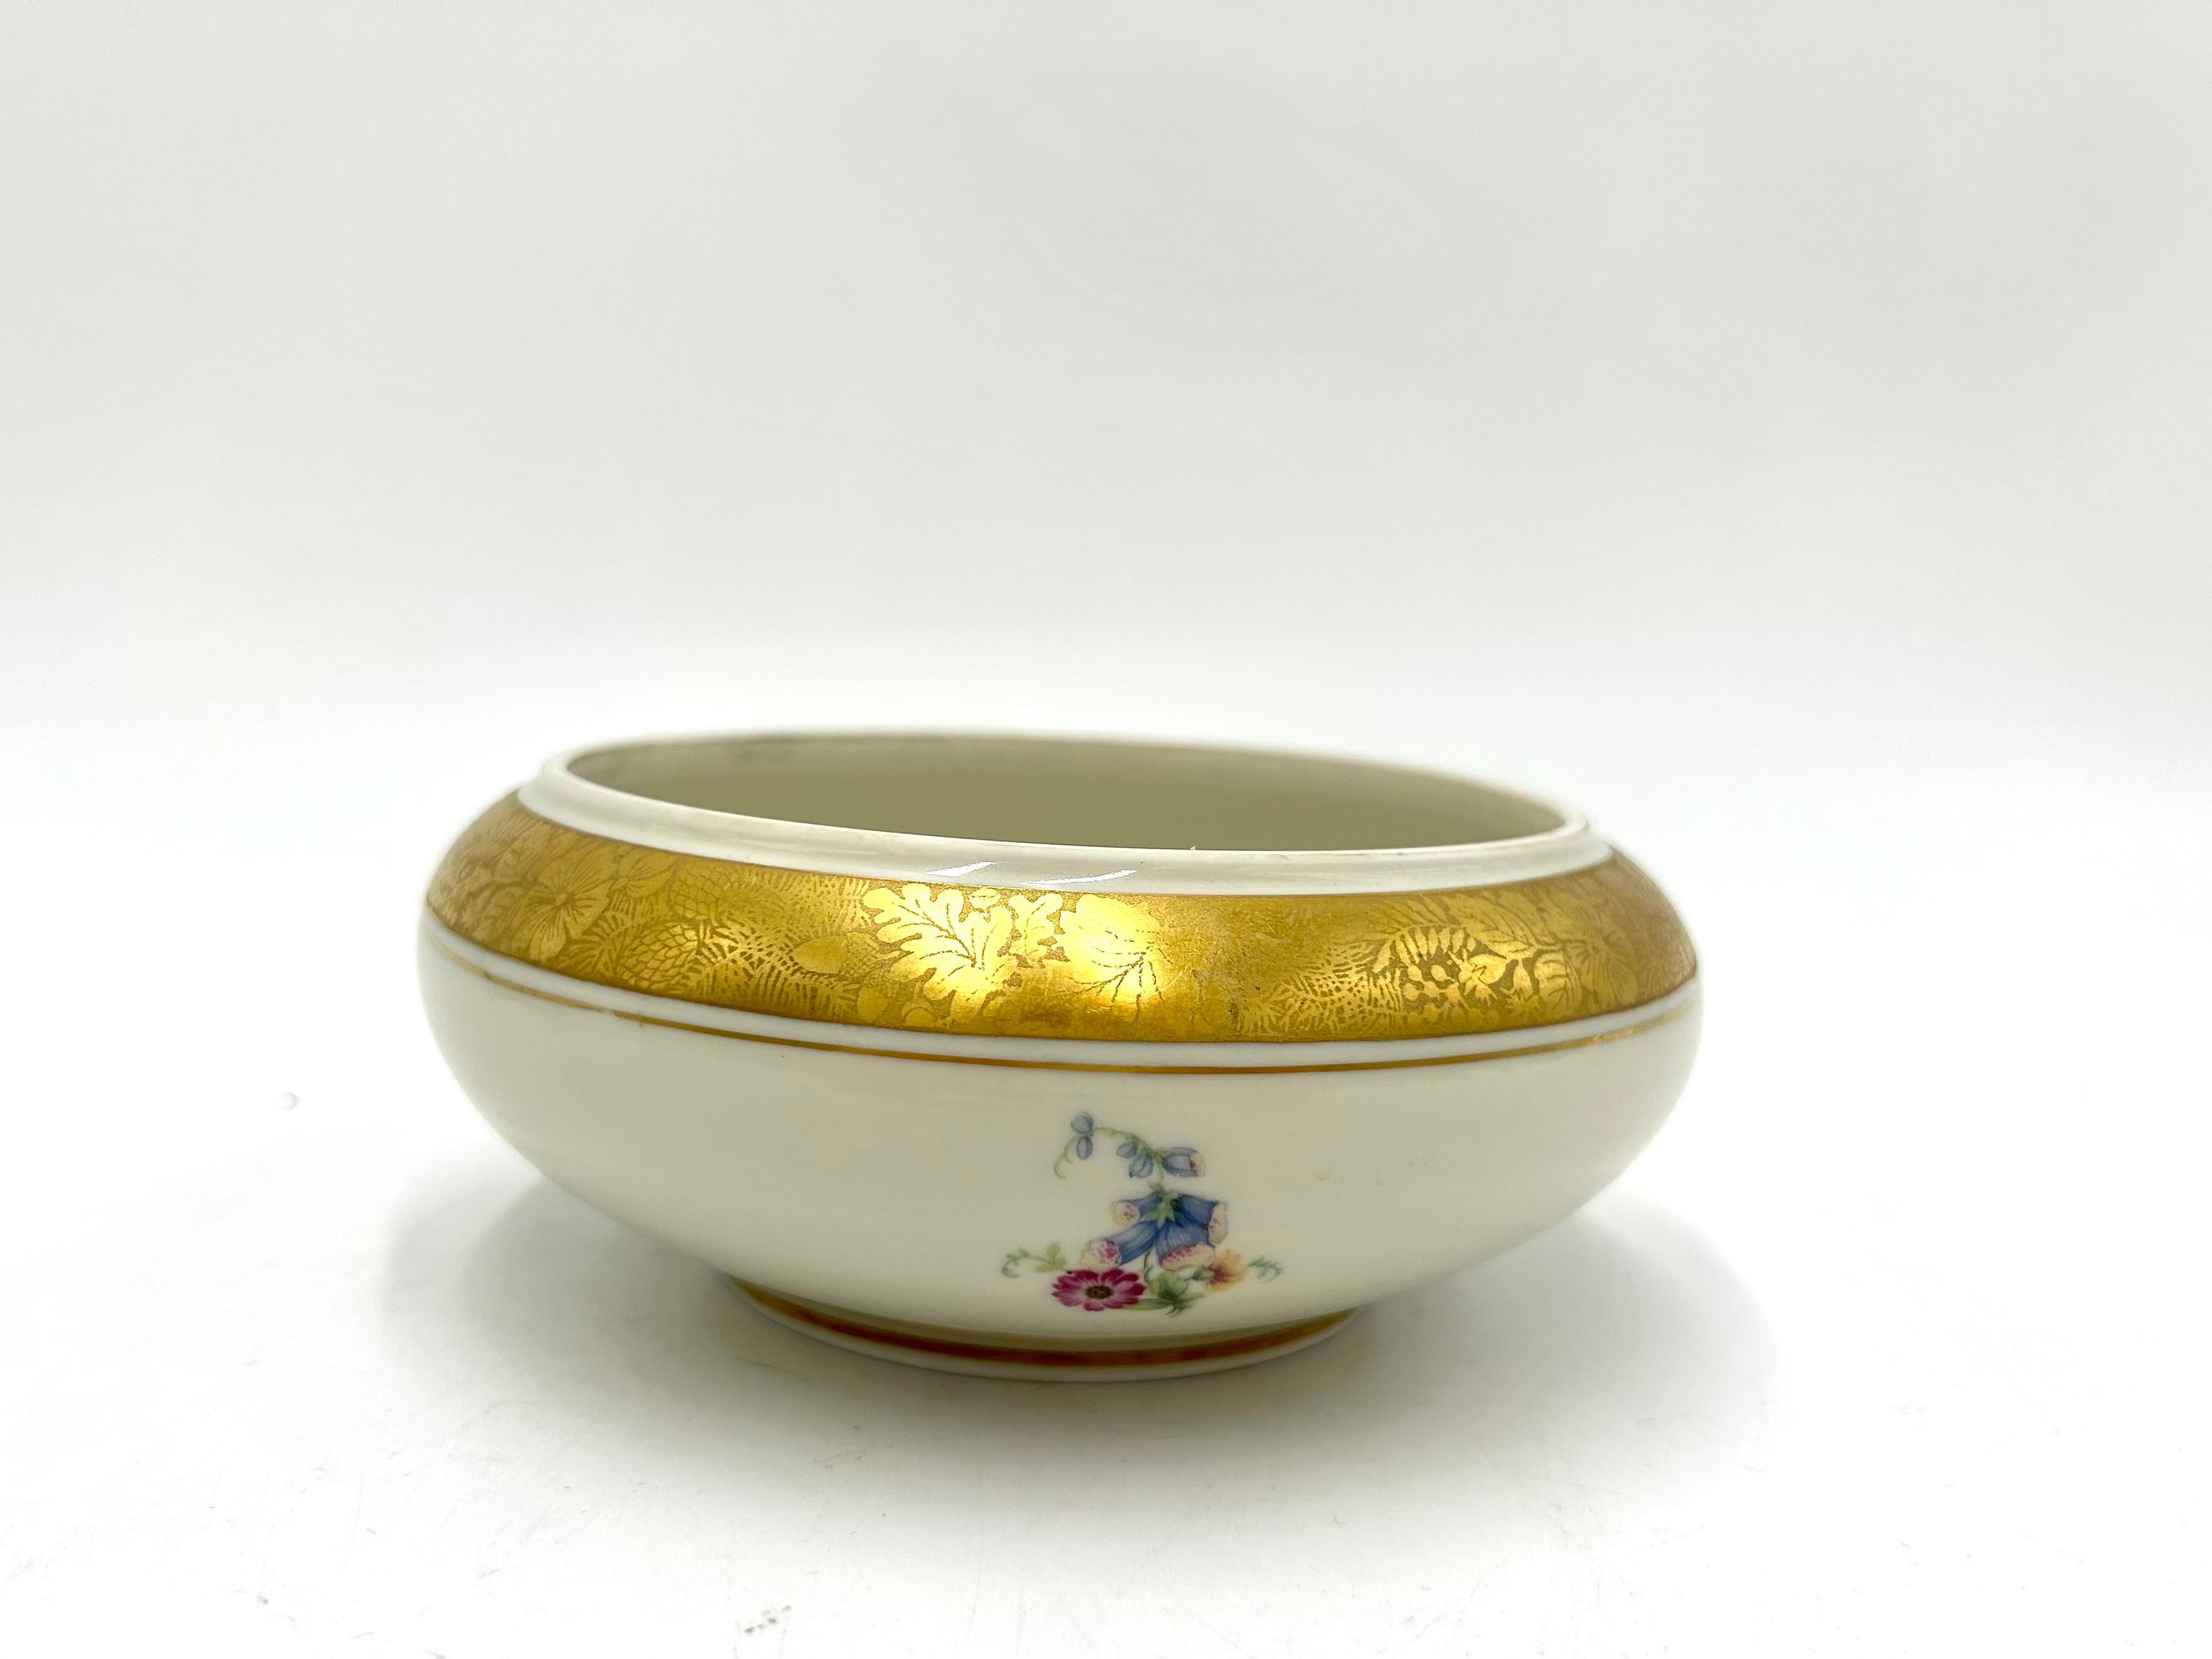 Porcelain bowl without a lid, produced by the excellent German Rosenthal factory in 1949. Very good condition, no damage.

Height 5 cm, Diameter 12.5 cm.